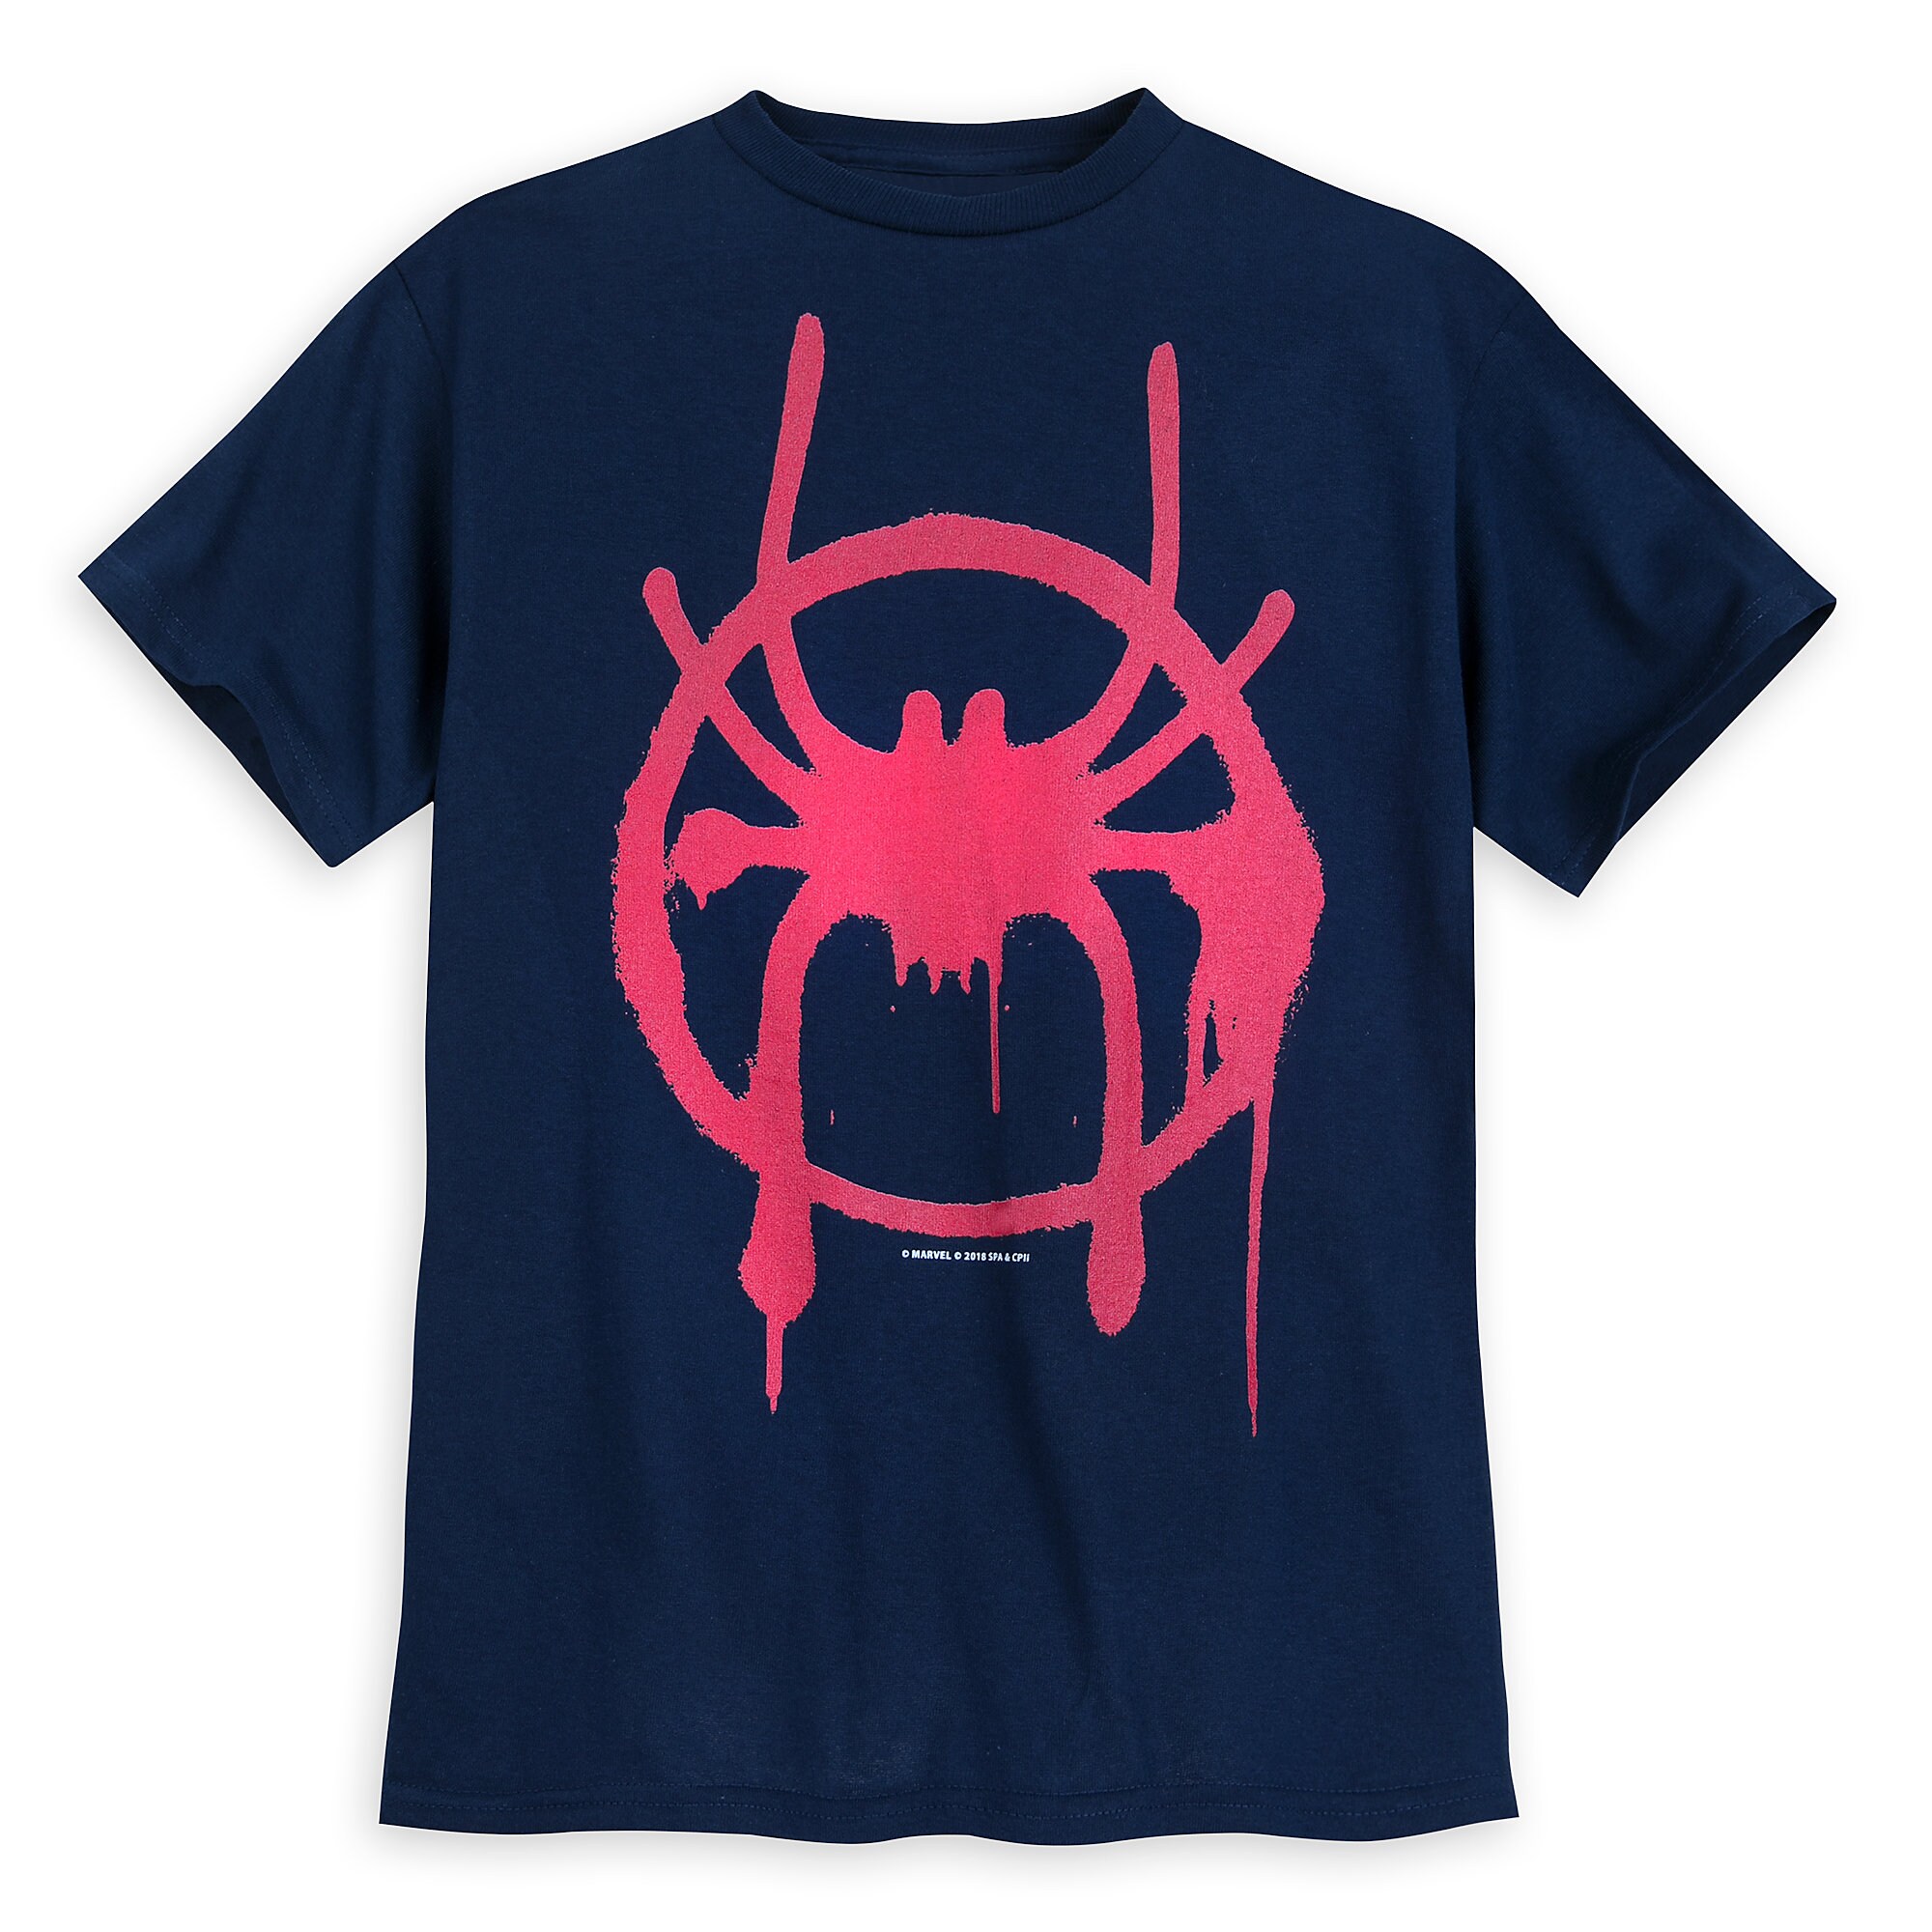 Spider-Man: Into the Spider-Verse Logo T-Shirt for Boys